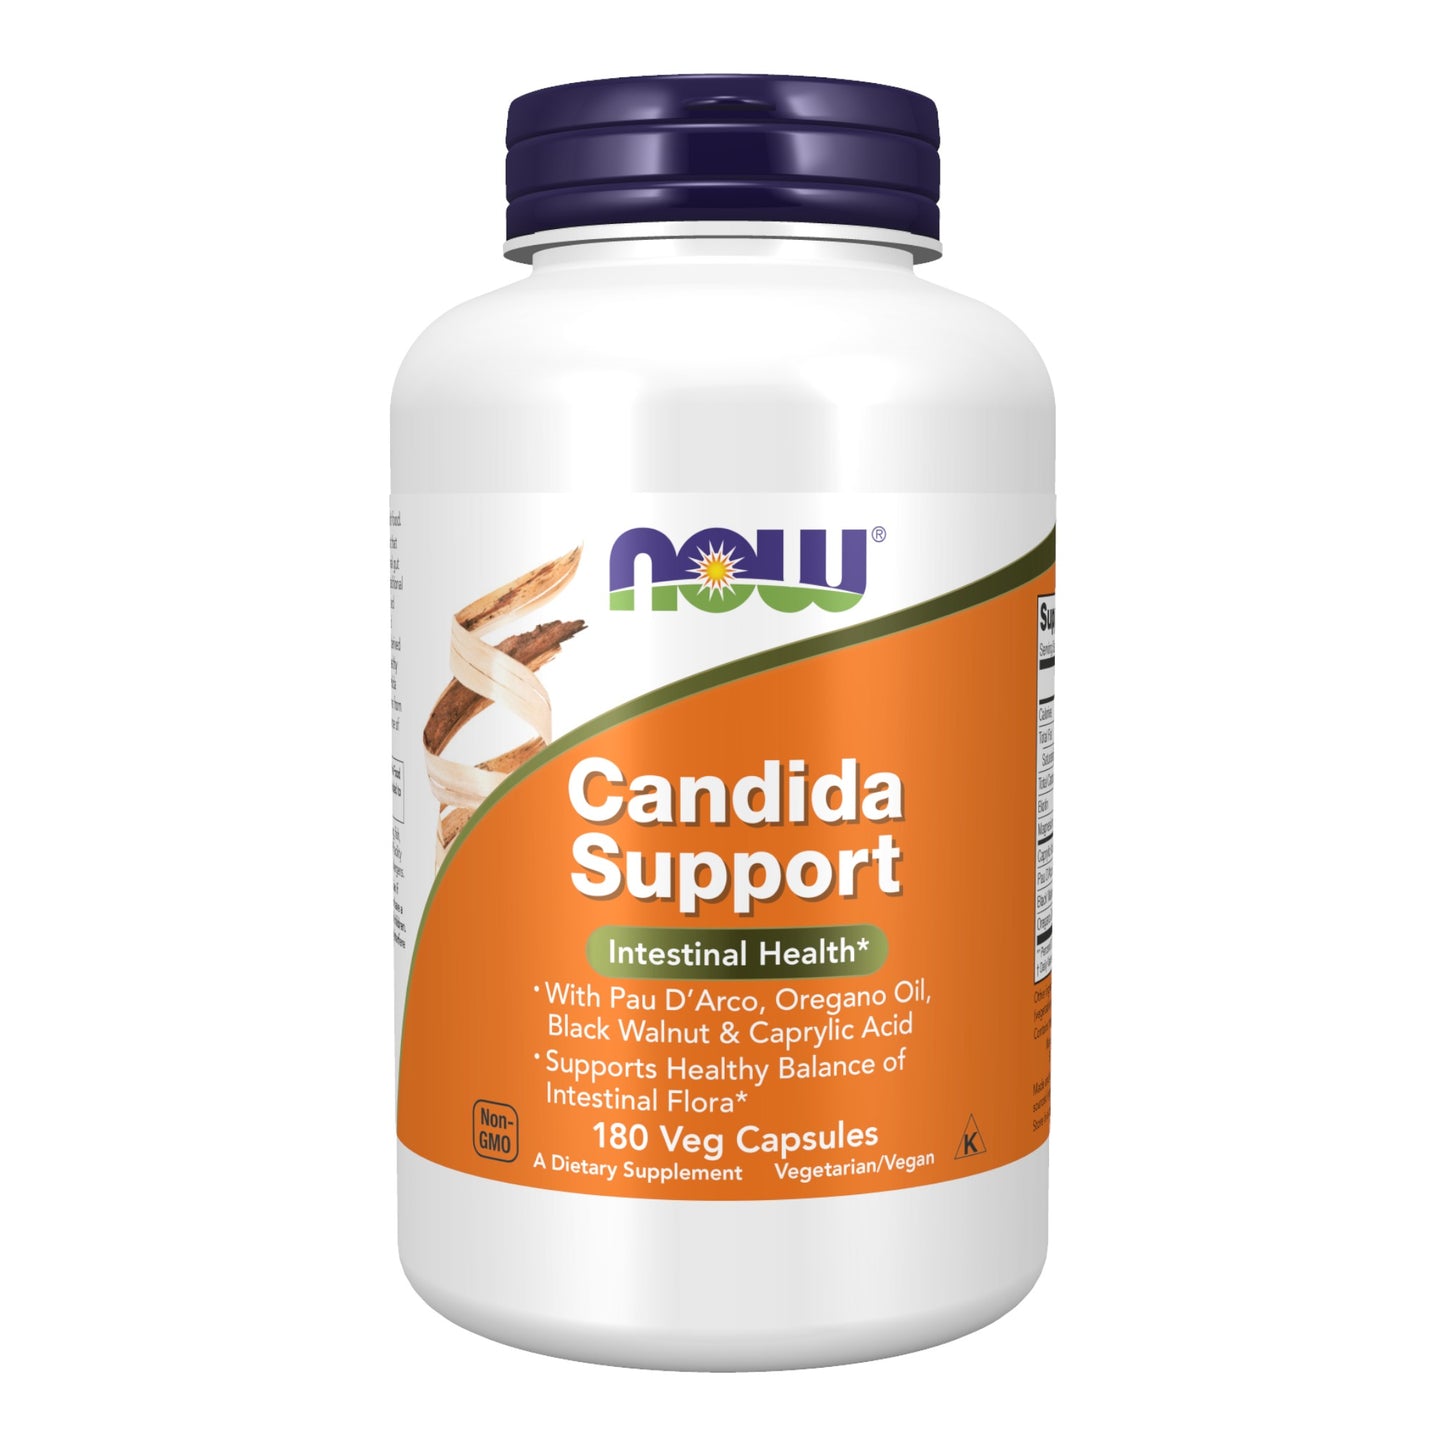 candida support